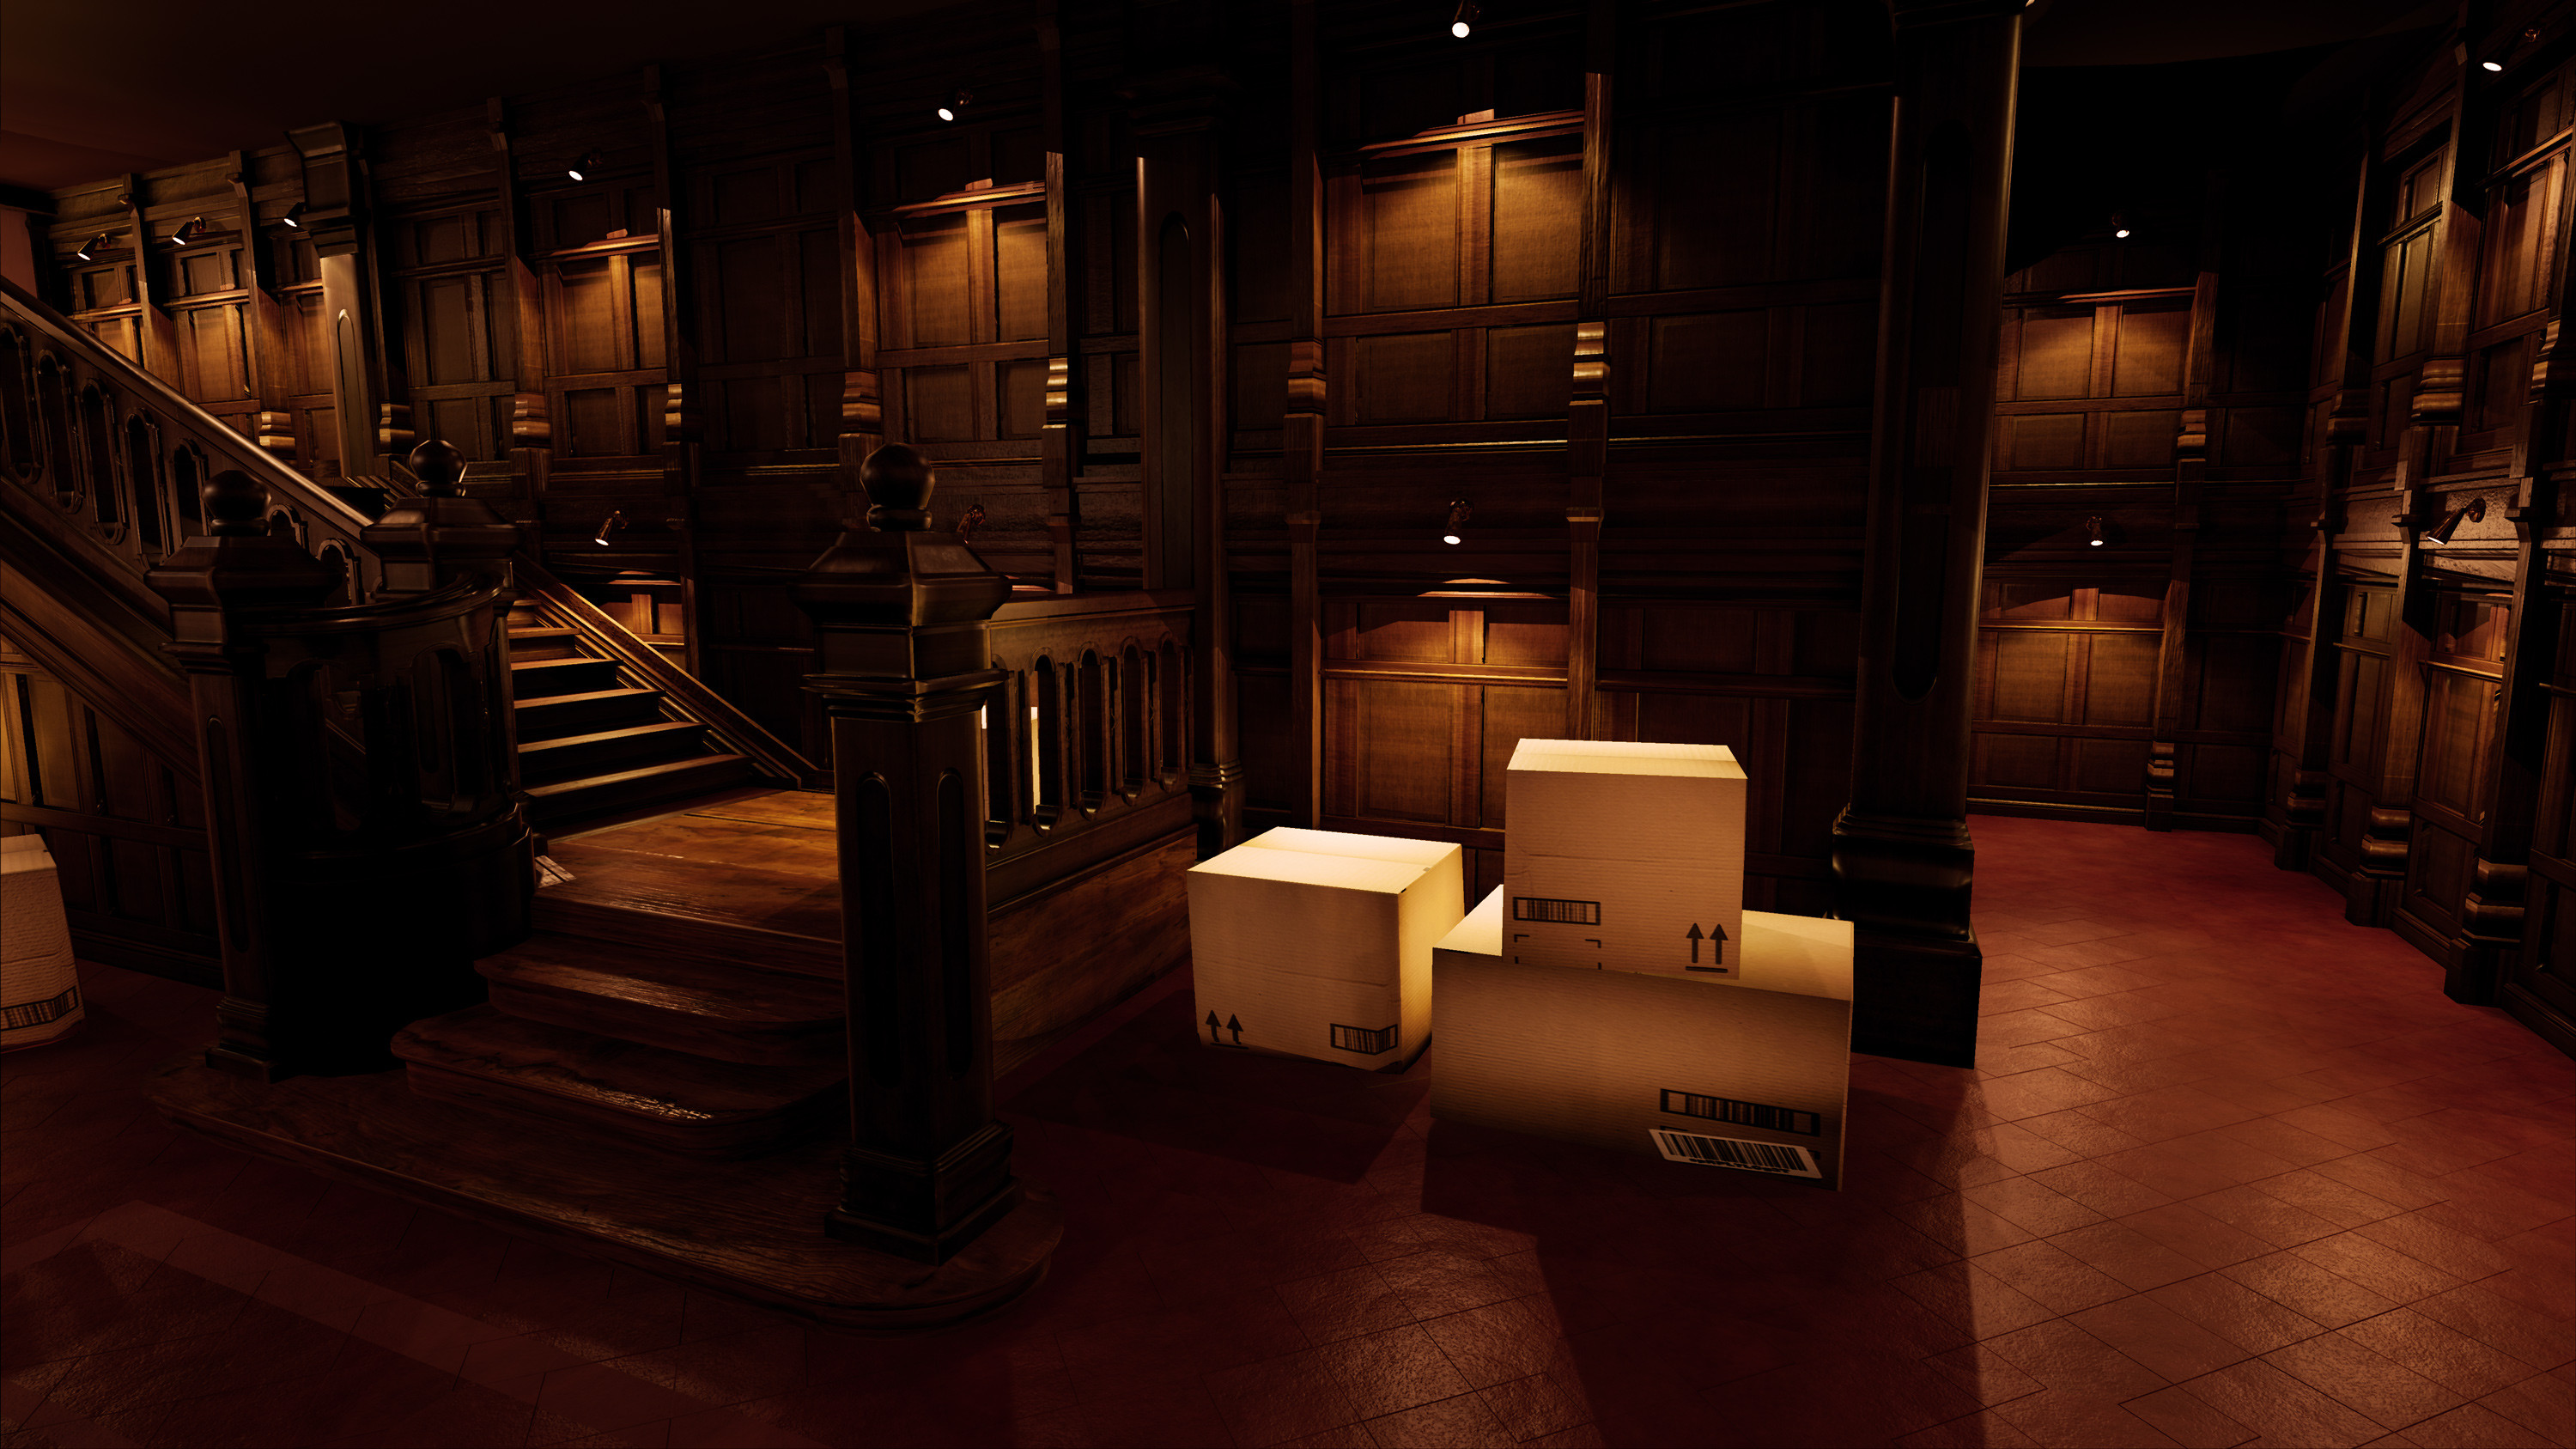 2nd lighting attempt in empty scene with personal 3D boxes